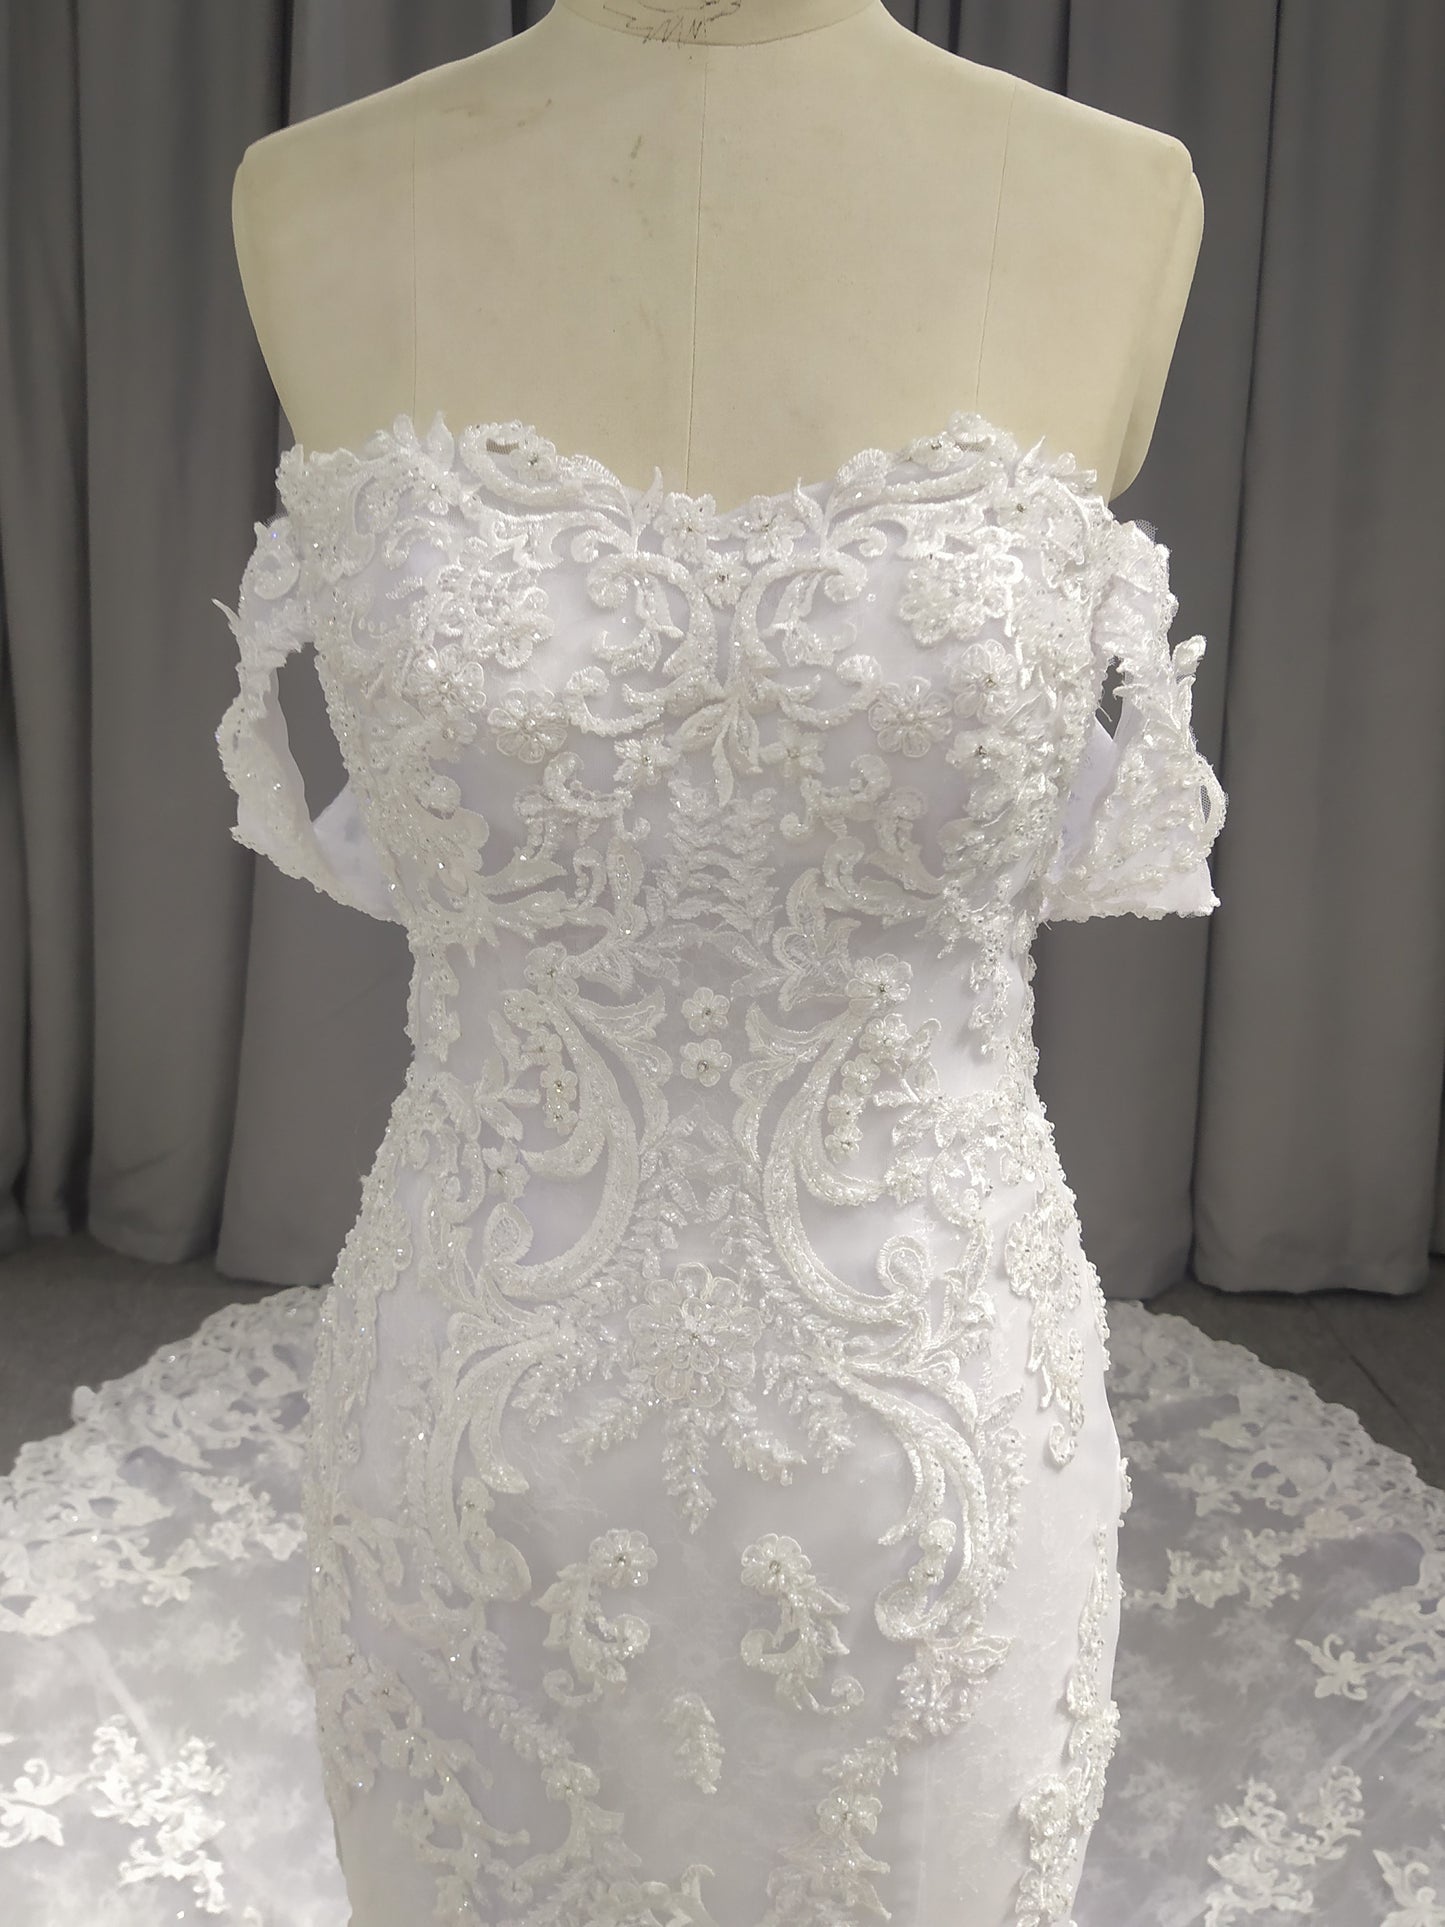 Sweetheart Neck Off The Should  Mermaid Wedding Dress With  Long Train C0024